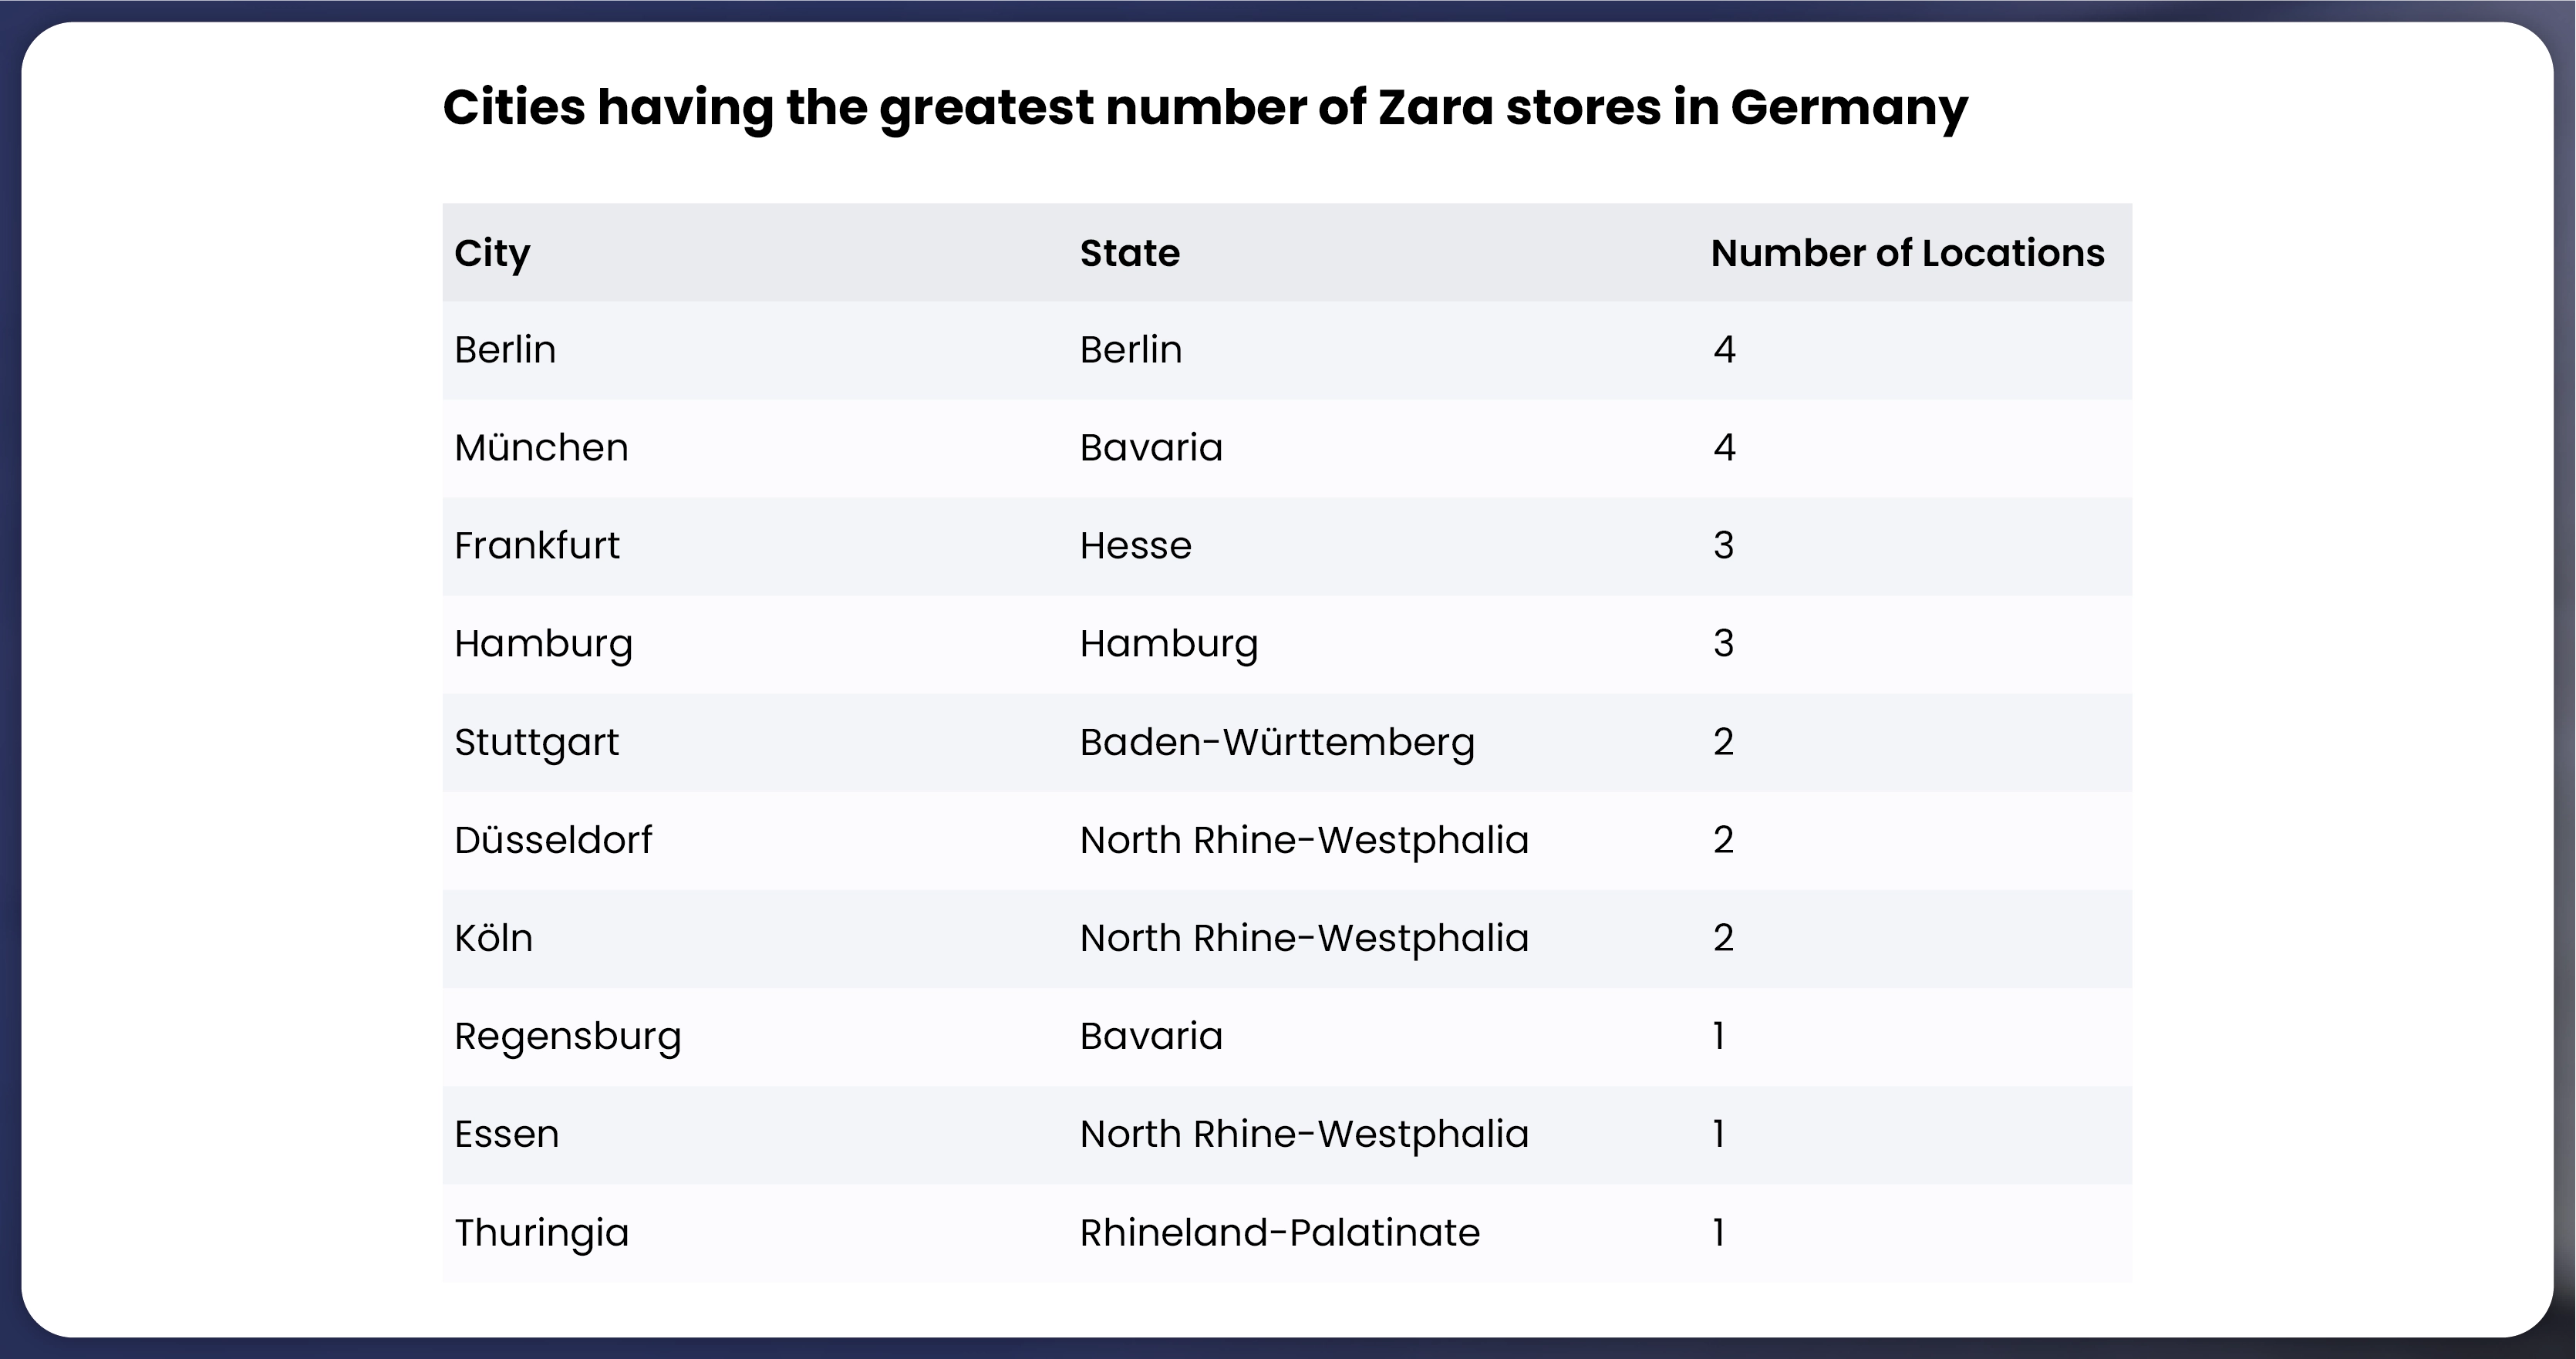 Zara-stores-are-present-in-13-out-of-the-16-federal-states-in-Germany